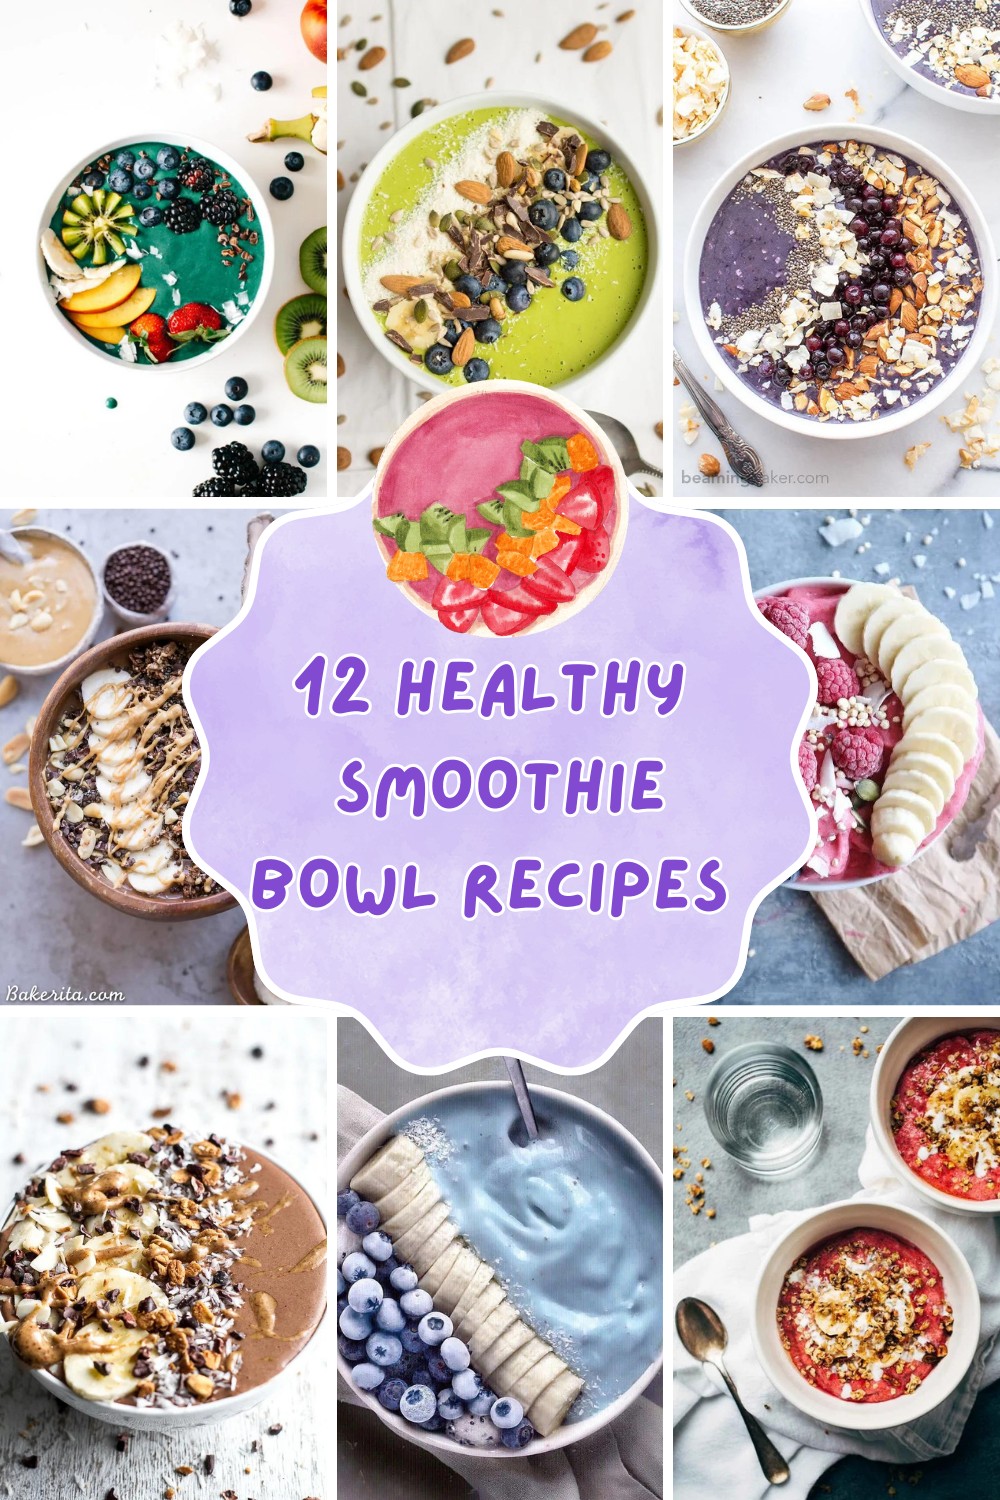 Discover the breakfast trend that's taking the world by storm – BEAUTY smoothie bowls! 🌟 These colorful and nutrient-packed bowls are designed to boost your mood and energize your day. From tropical flavors to berry bliss, there's a smoothie bowl here to make you smile every morning. 🥥🍌 #SmoothieBowls #HealthyEats #MorningBoost







